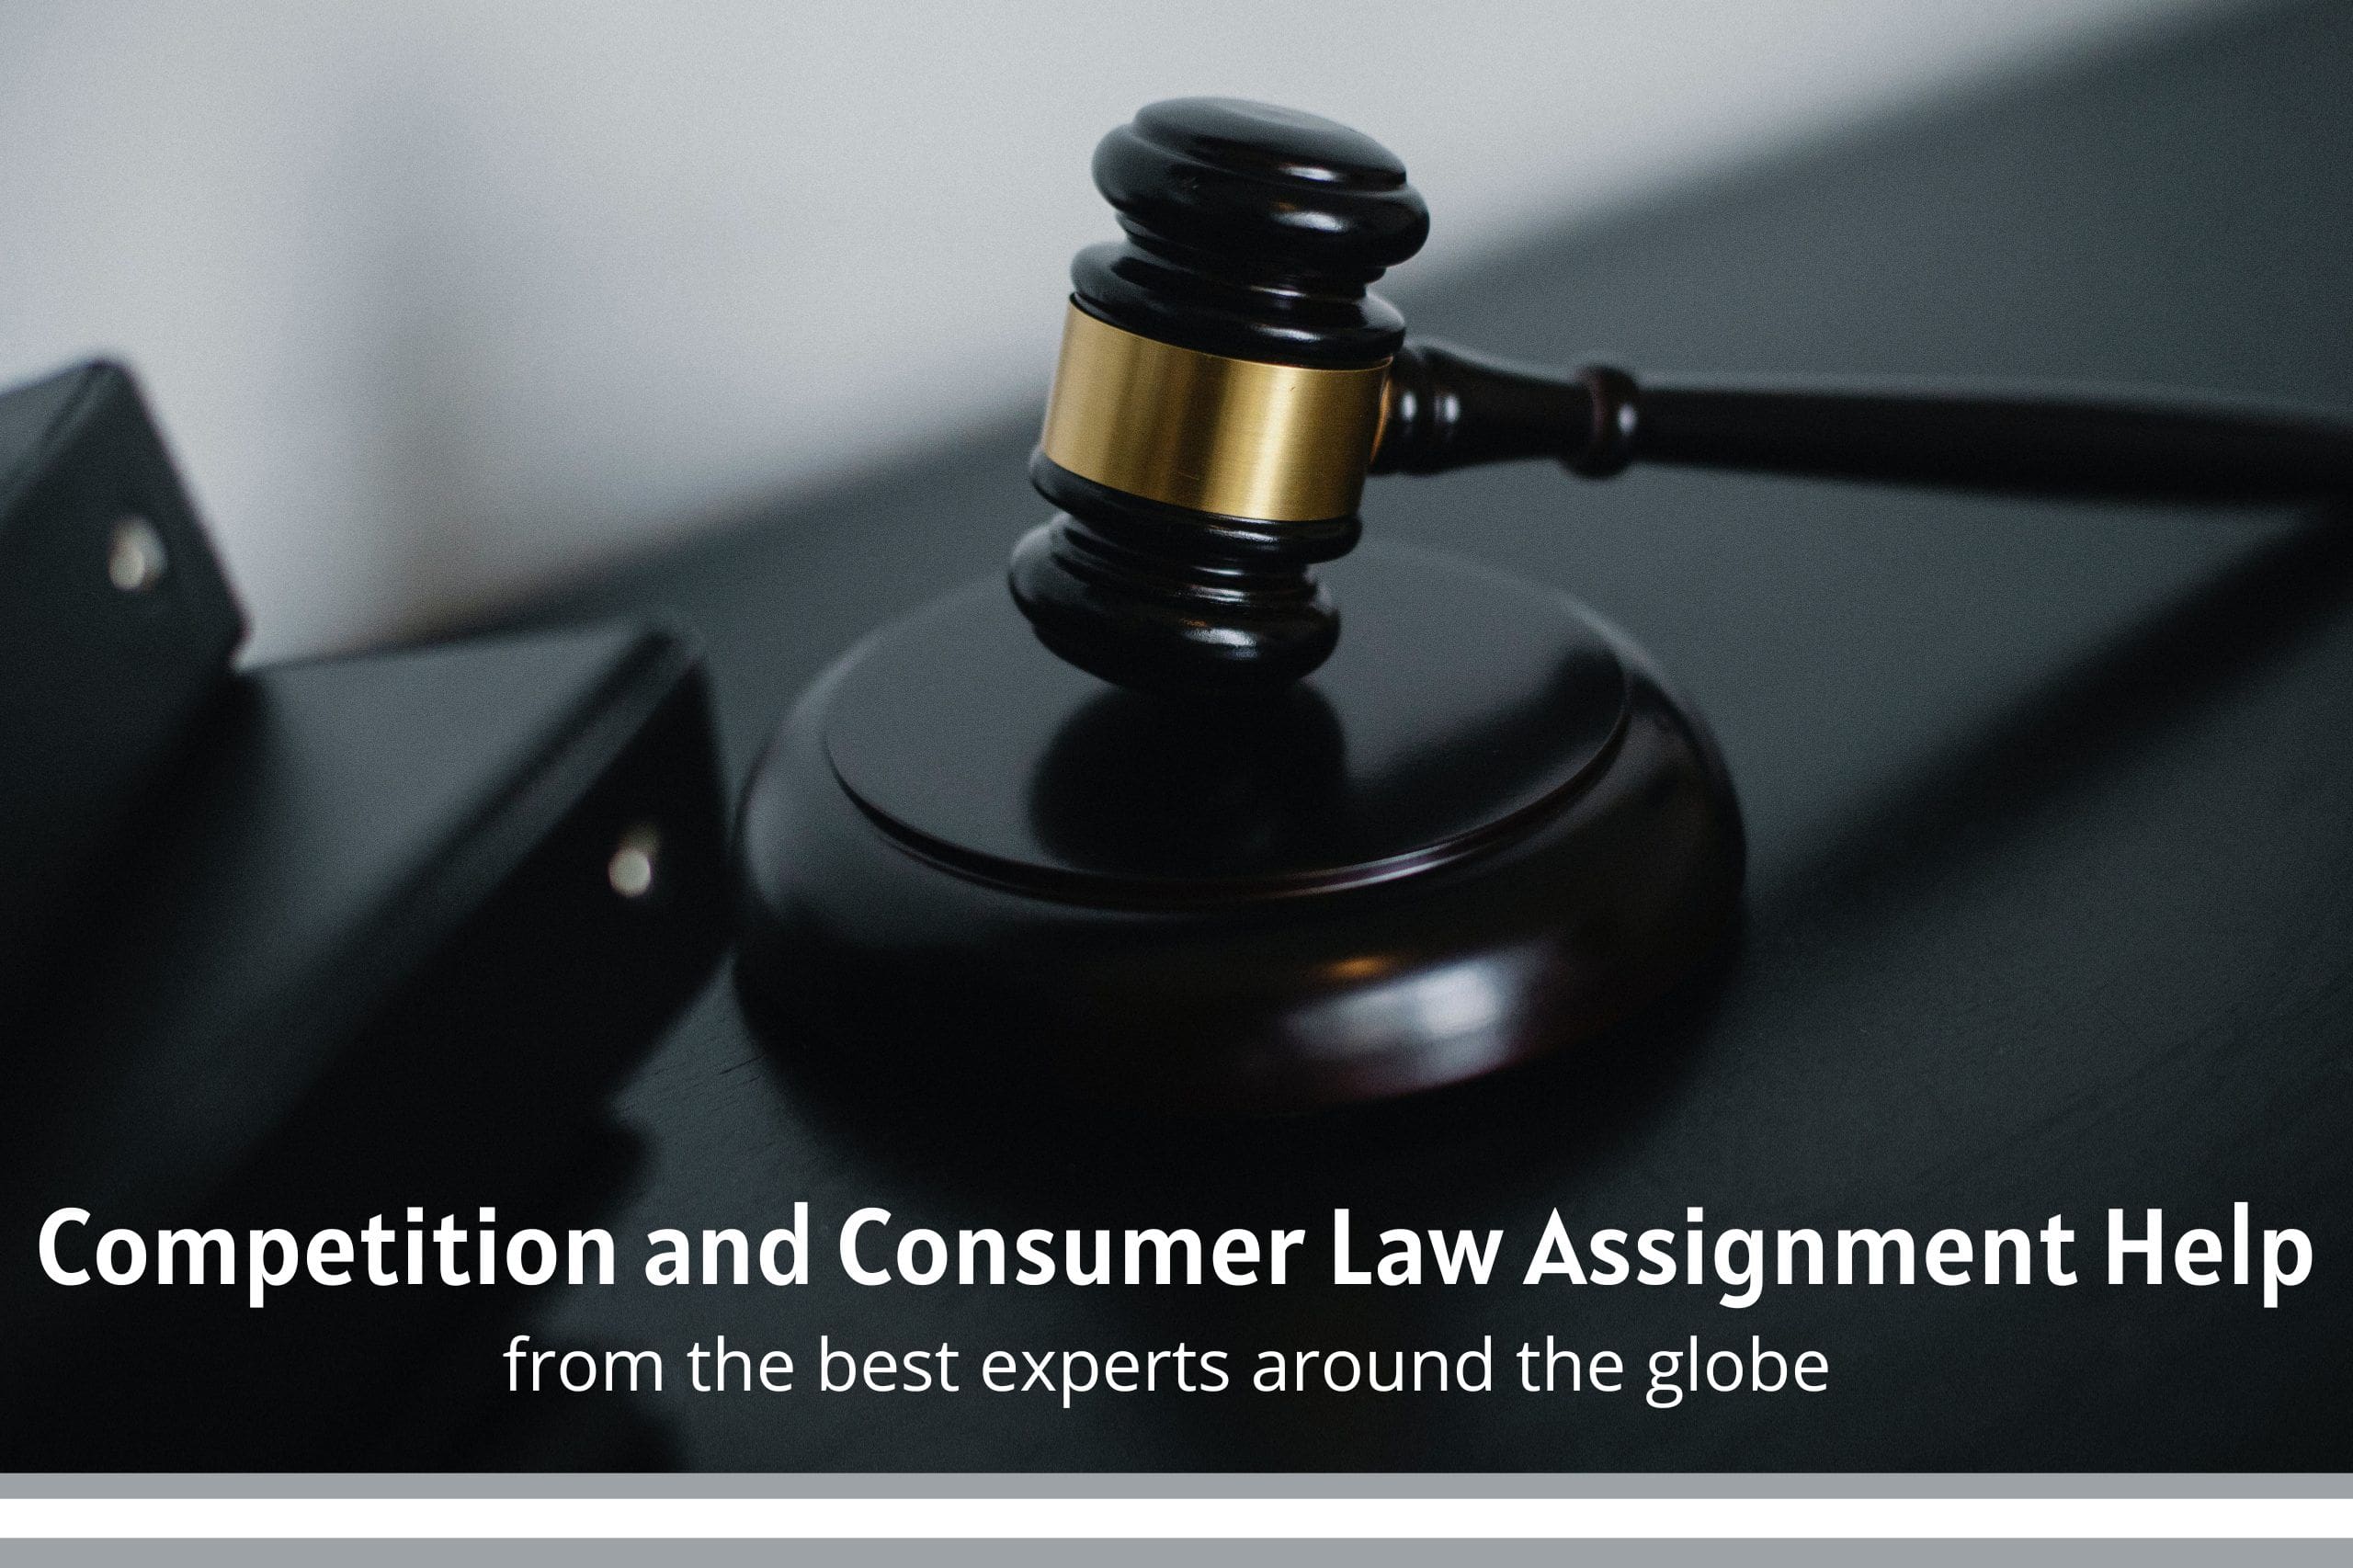 Competition and Consumer Law Assignment Help from the best Experts Around the Globe